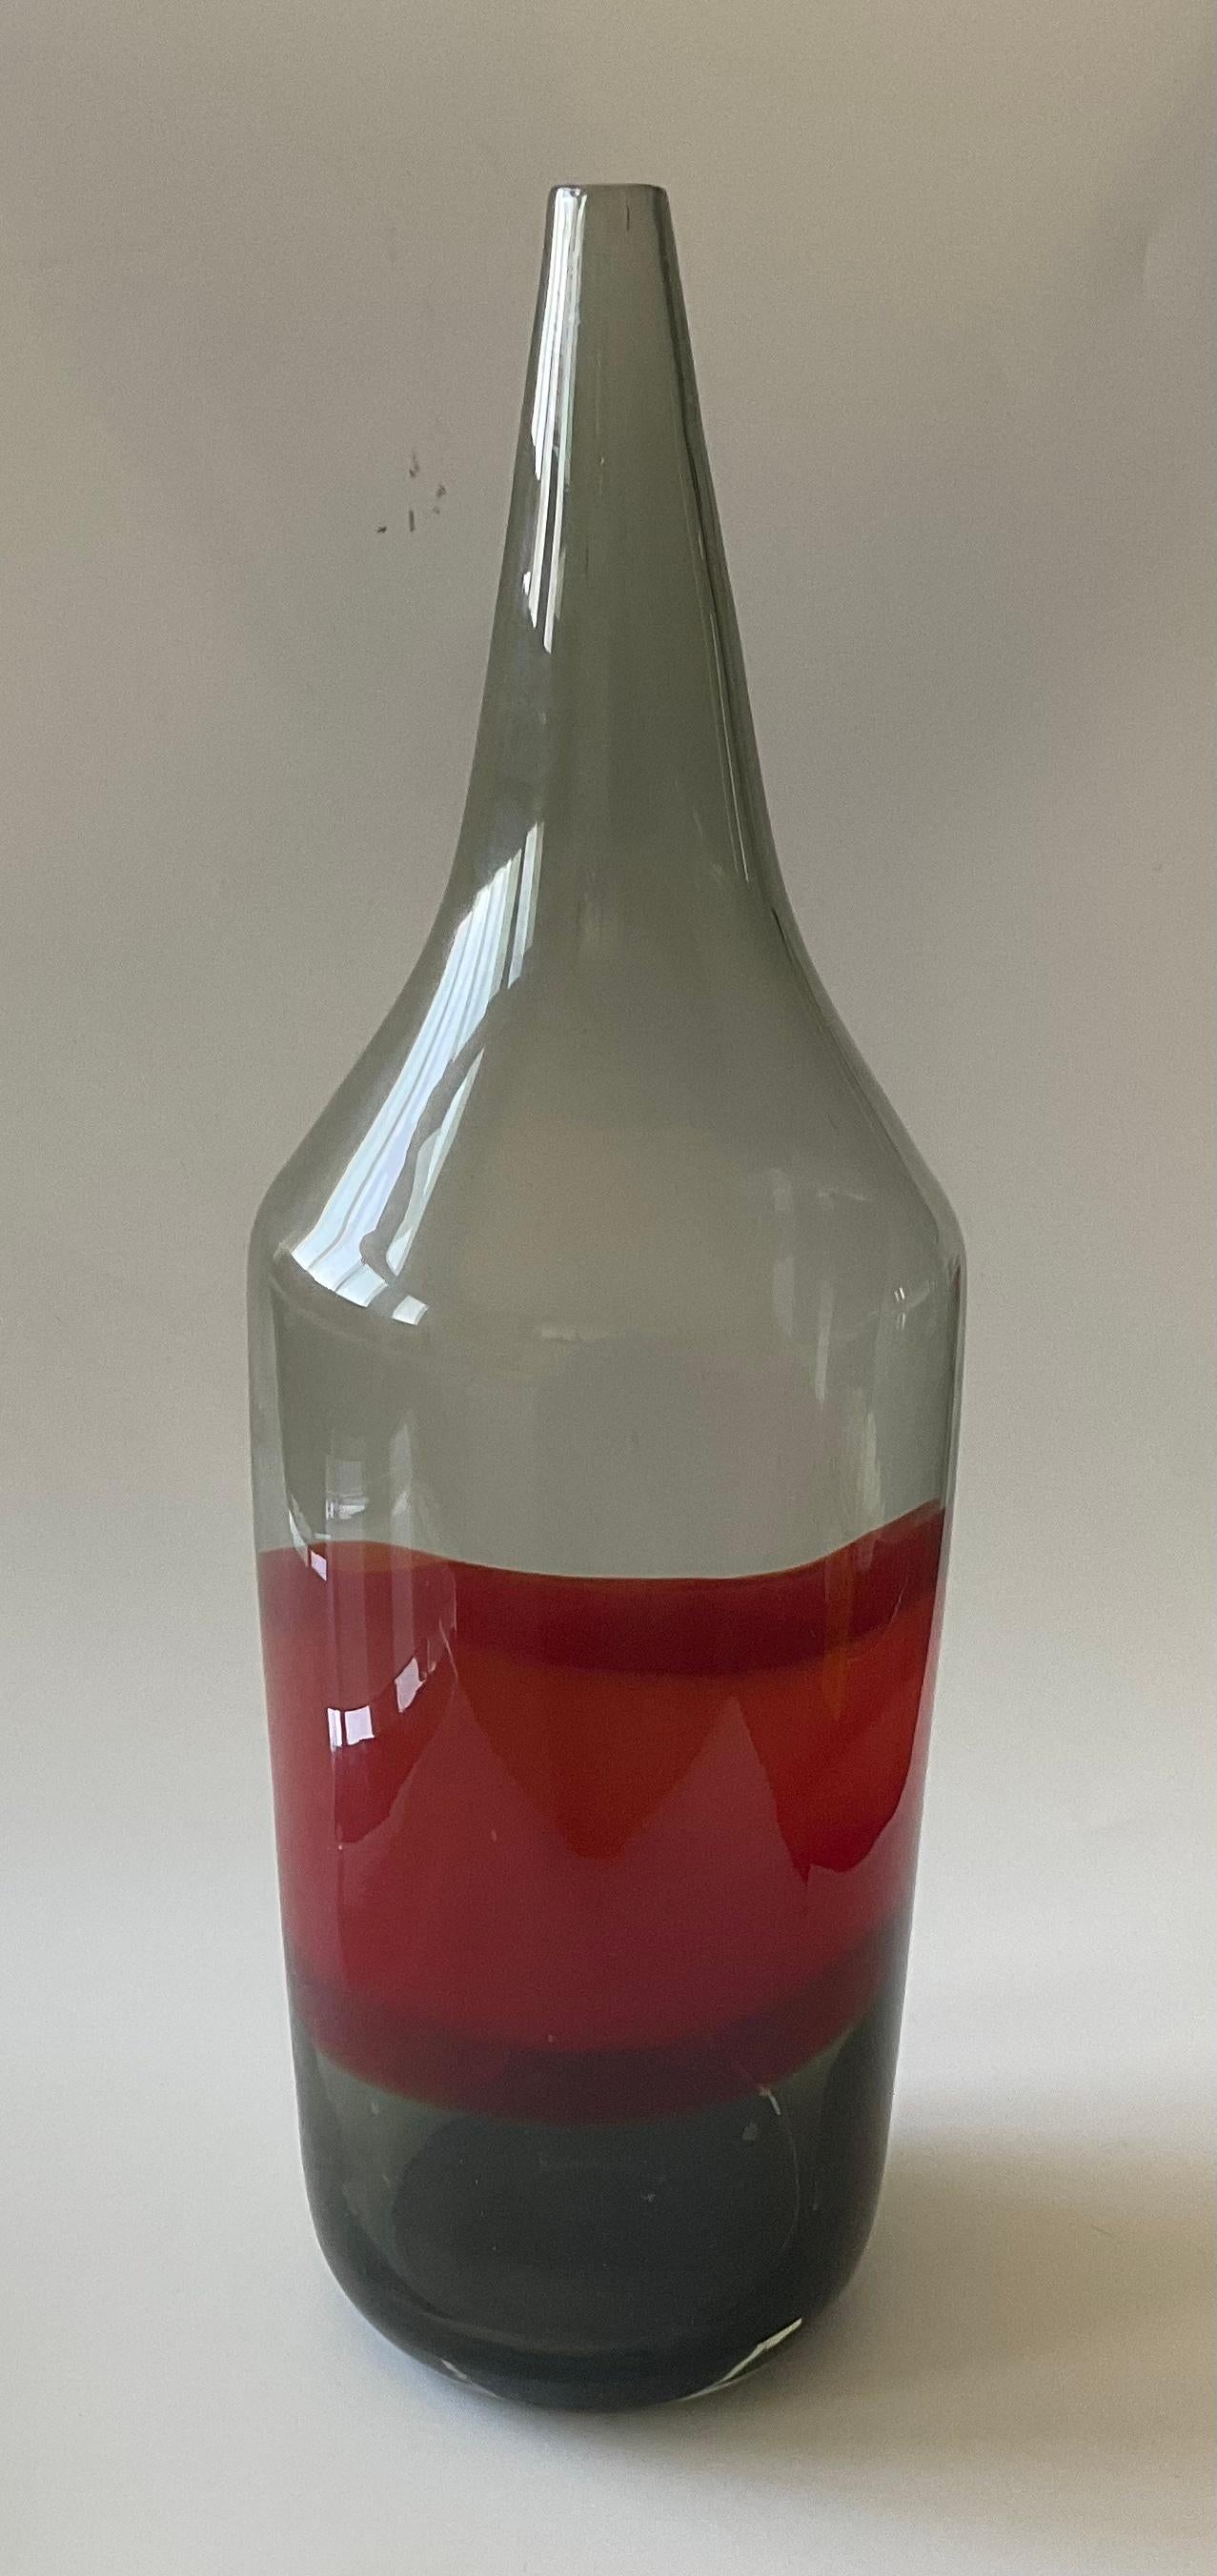 Large Vistosi Murano glass incalmo bottle from vase in smoke gray with red band Signed with its original label. Impressive size and design.